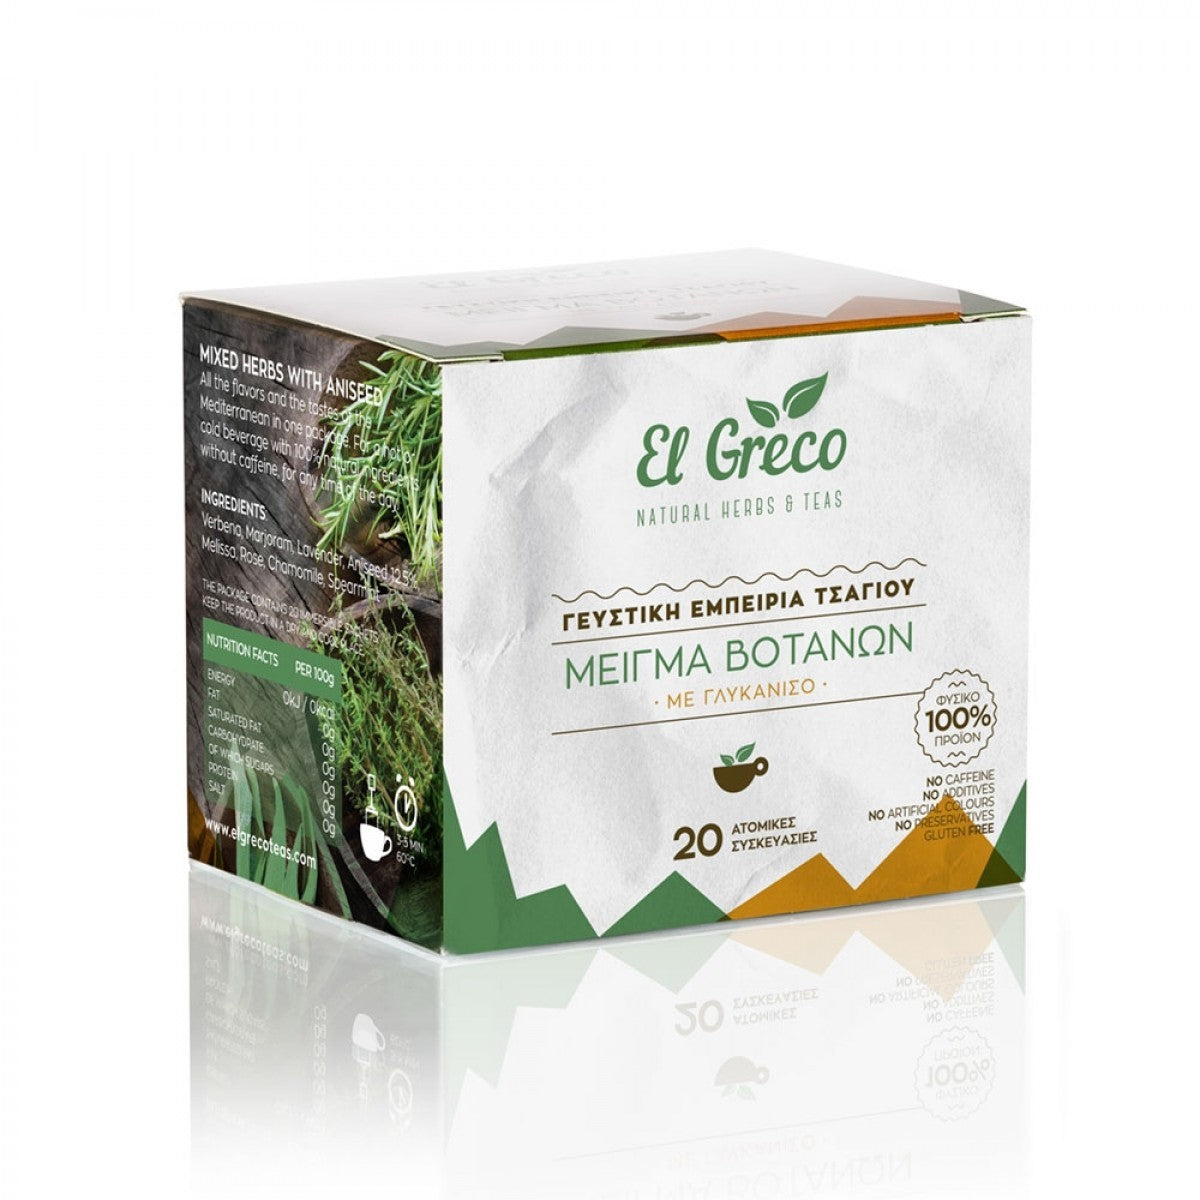 El Greco Herbal Blend with Aniseed